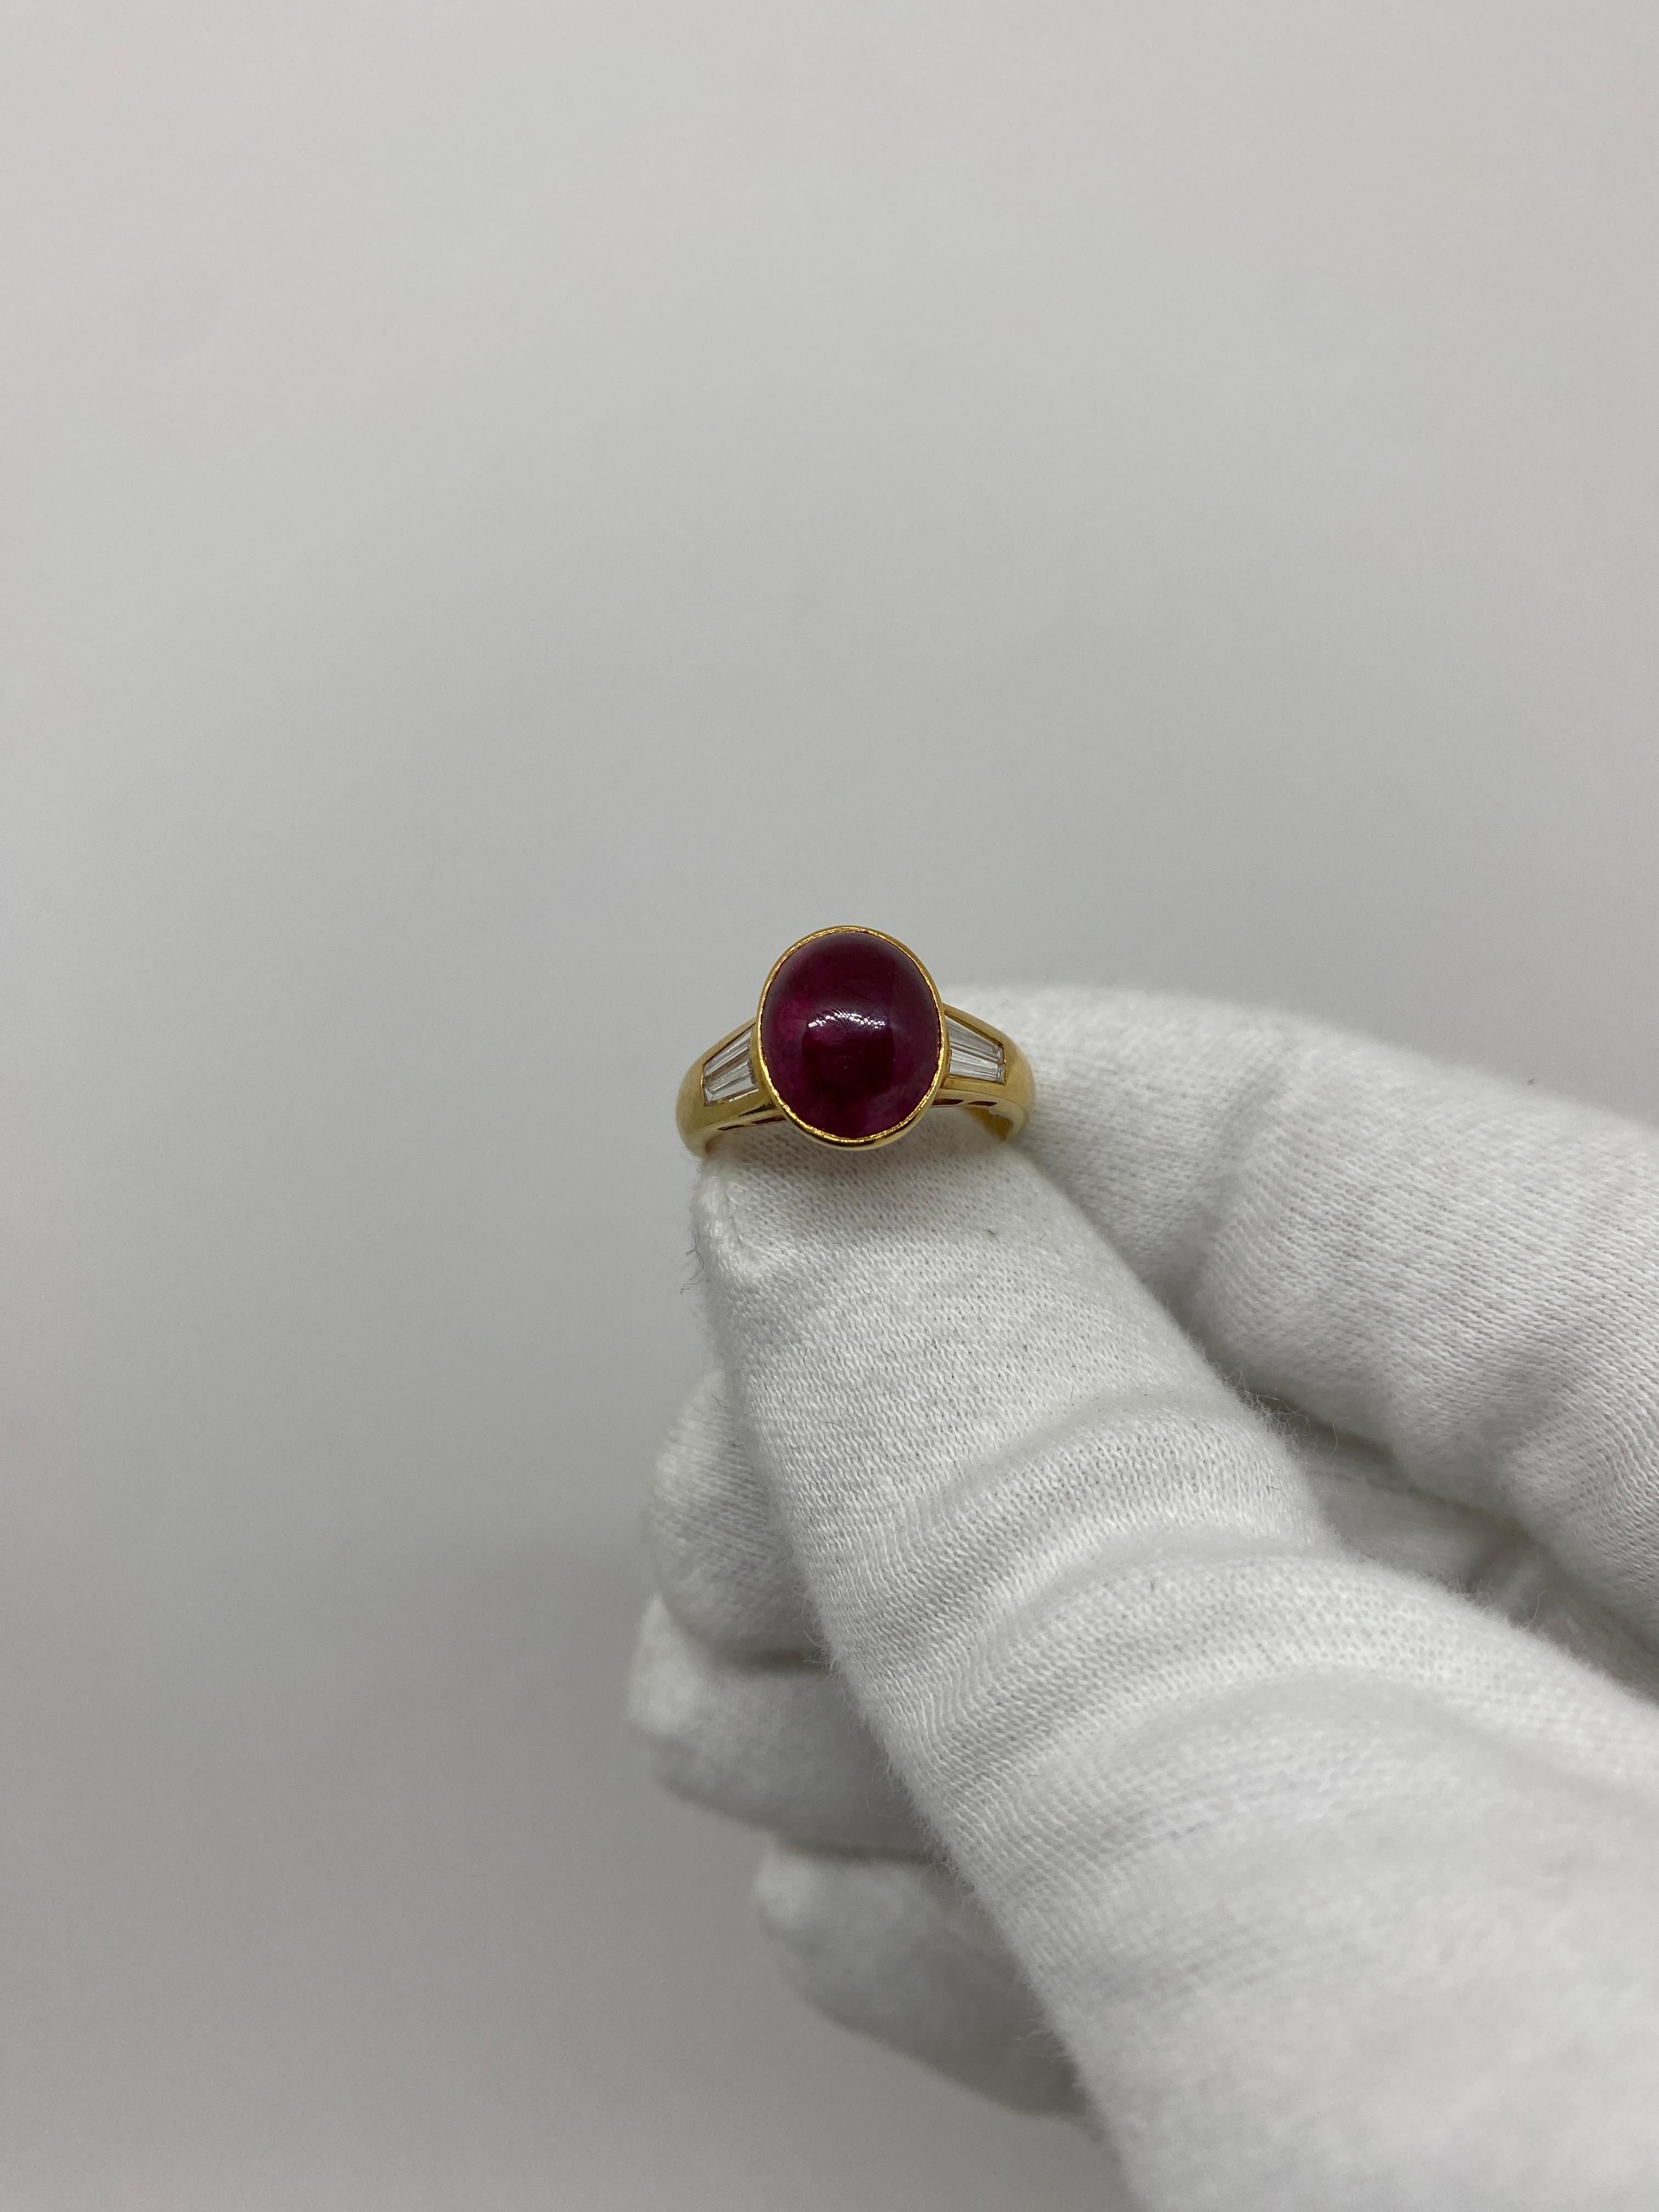 Ring made of 18kt yellow gold with natural oval-cut ruby for ct.4.63 and natural white baguette-cut diamonds for ct.0.42

Welcome to our jewelry collection, where every piece tells a story of timeless elegance and unparalleled craftsmanship. As a